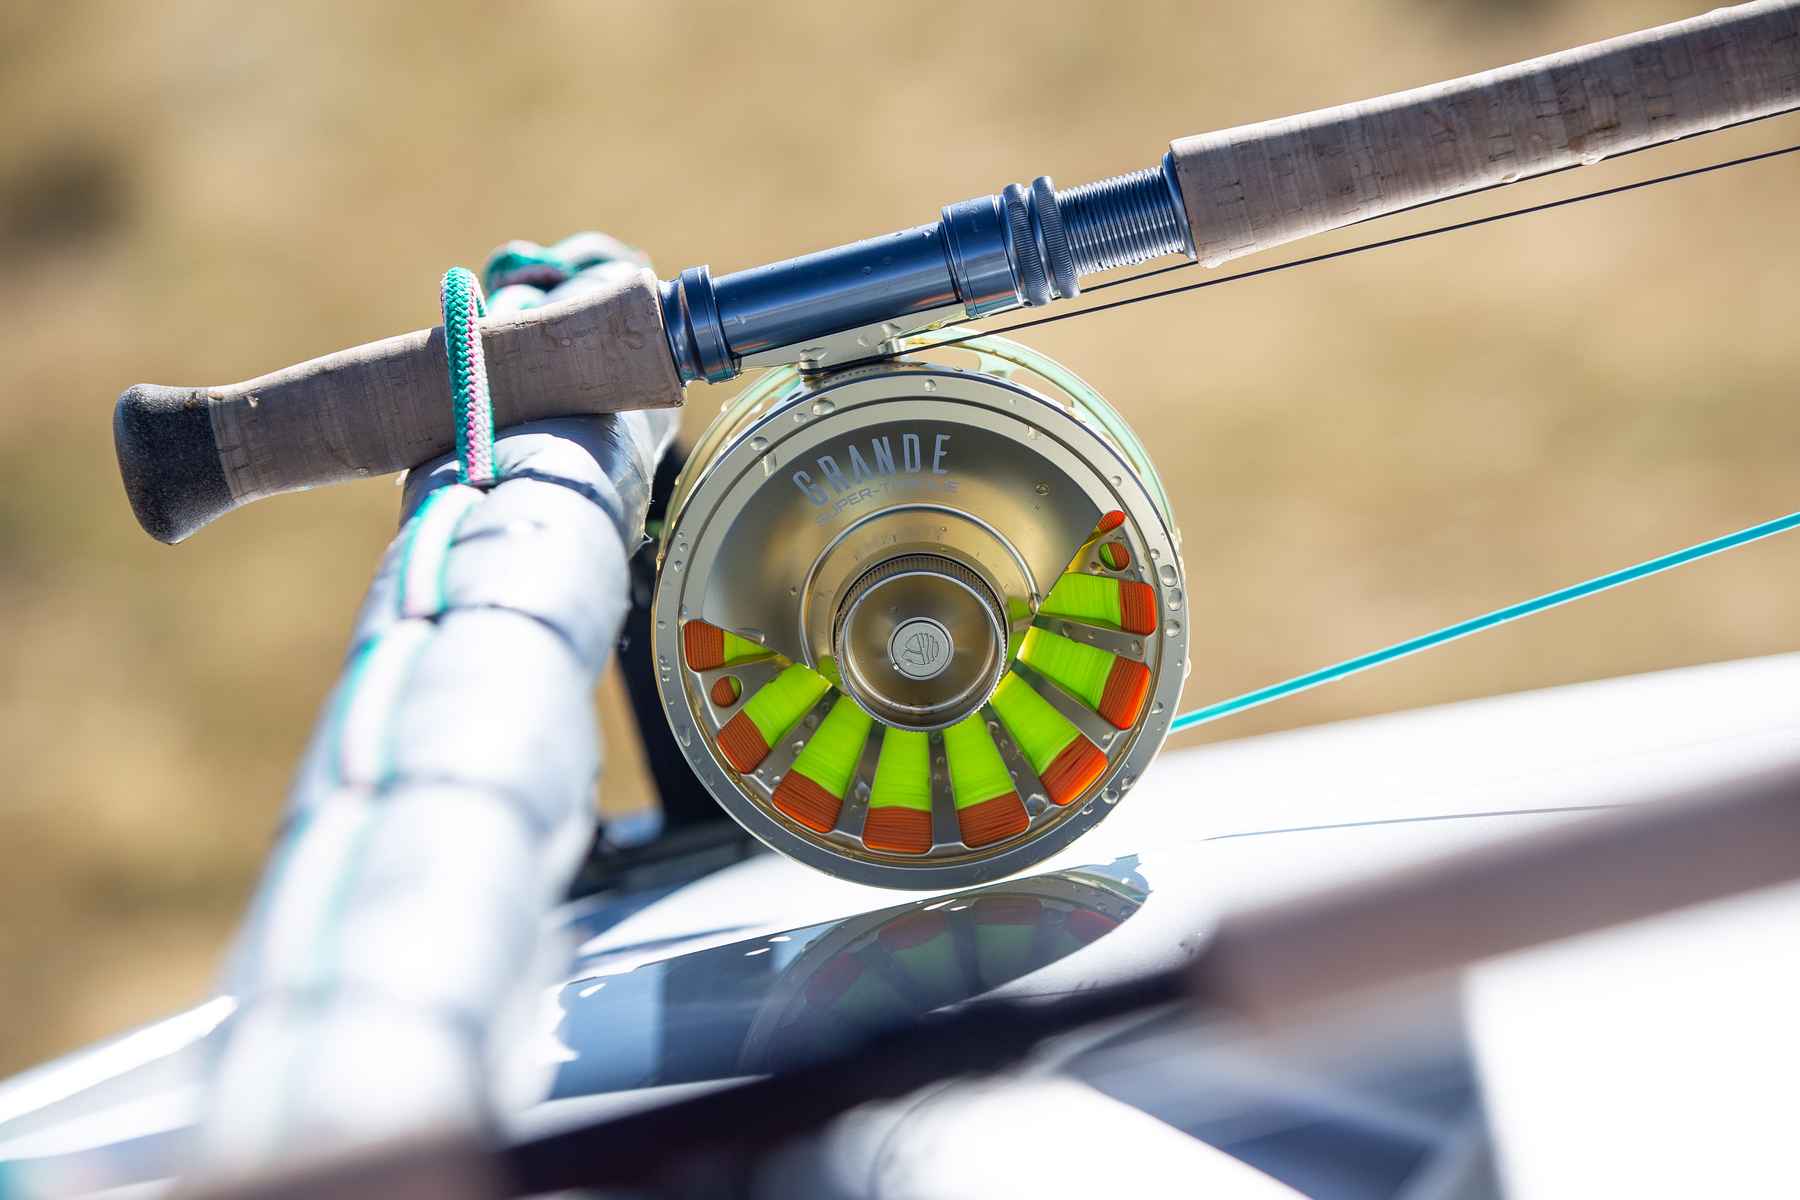 Classic fly reels are designed to accommodate different